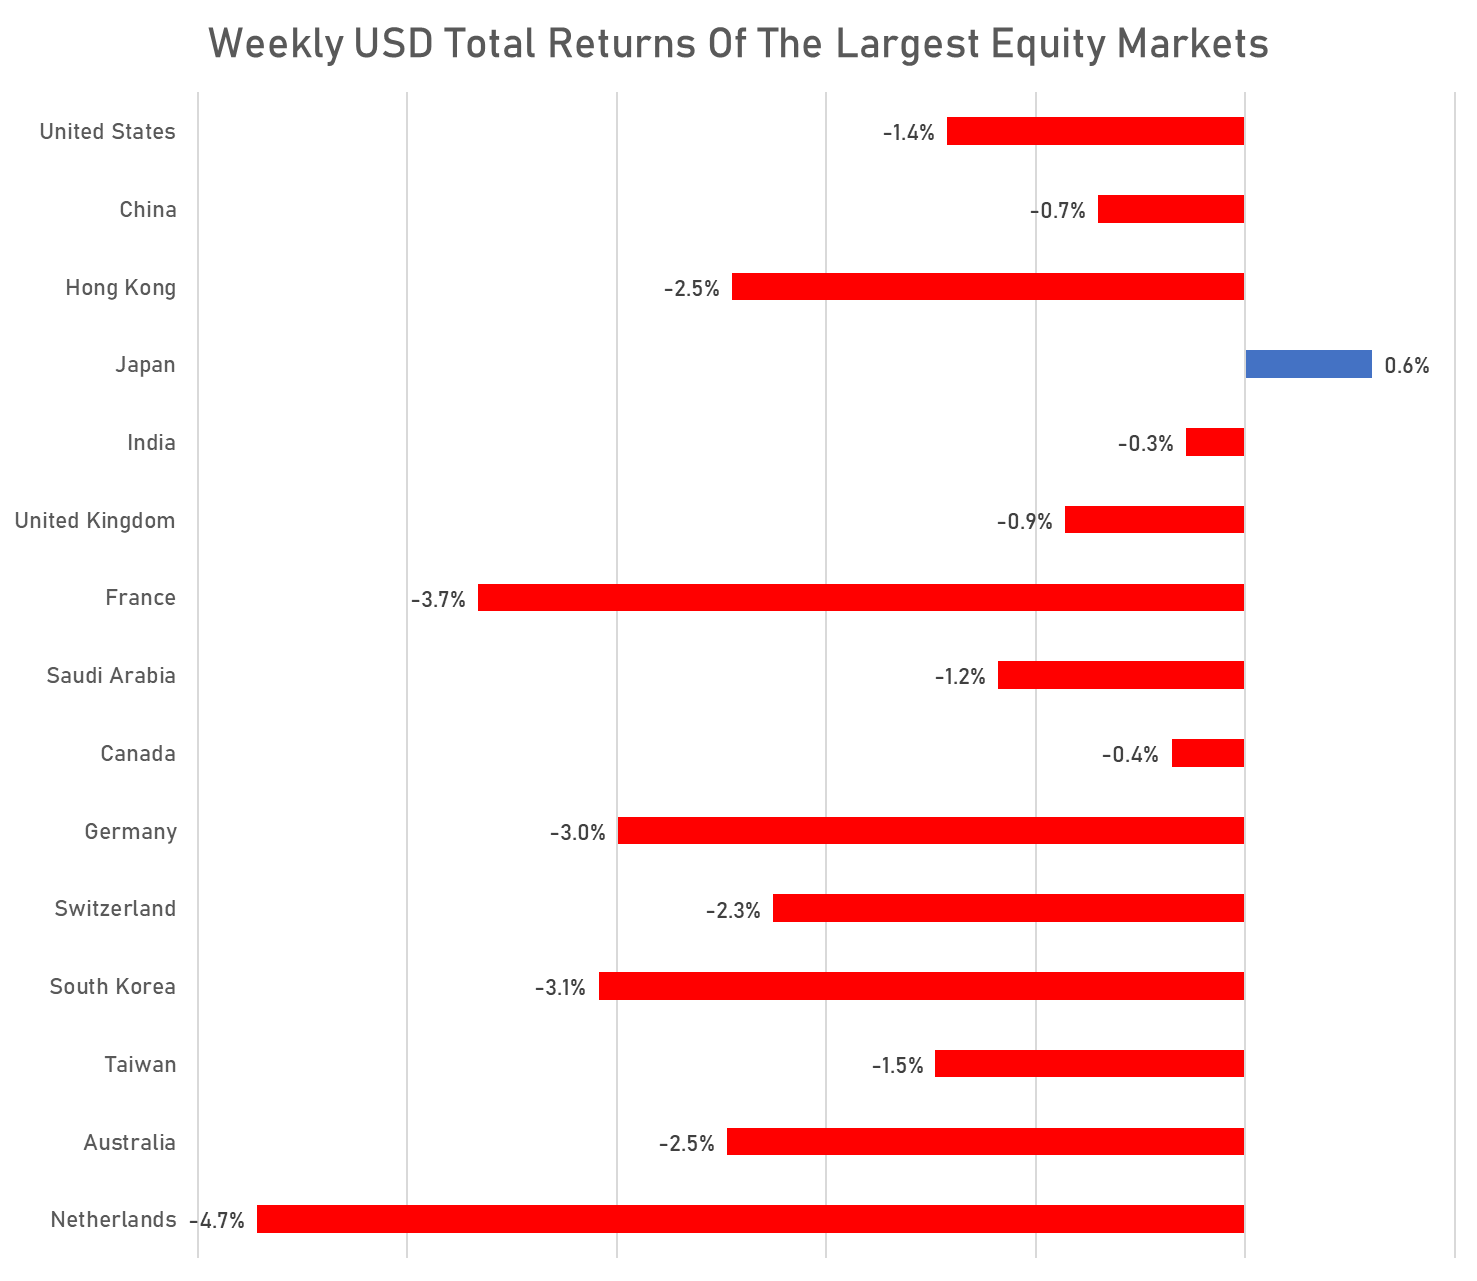 Weekly USD Total Returns For Major Equity Markets | sources: phipost.com, FactSet data